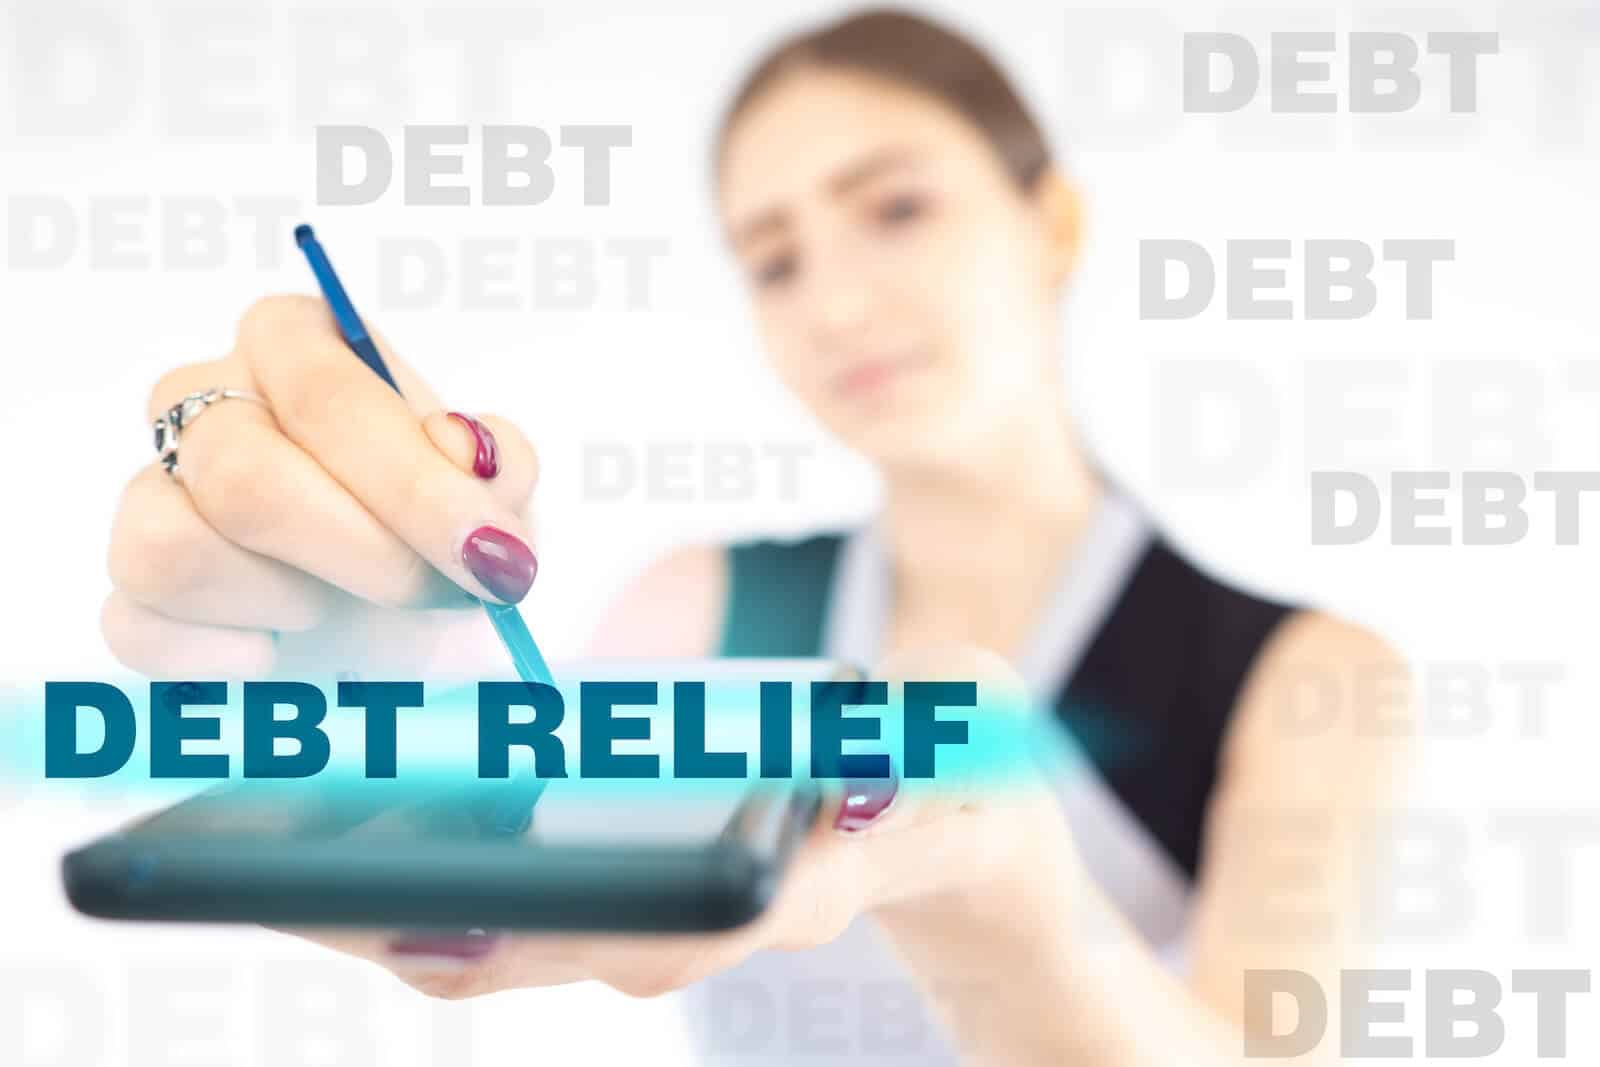 <p><span>Debt can be a major roadblock on your journey to financial freedom. Start by paying off high-interest debt like credit cards, then work your way down. </span></p><p><span>The sooner you become debt-free, the faster you can build wealth.</span></p>